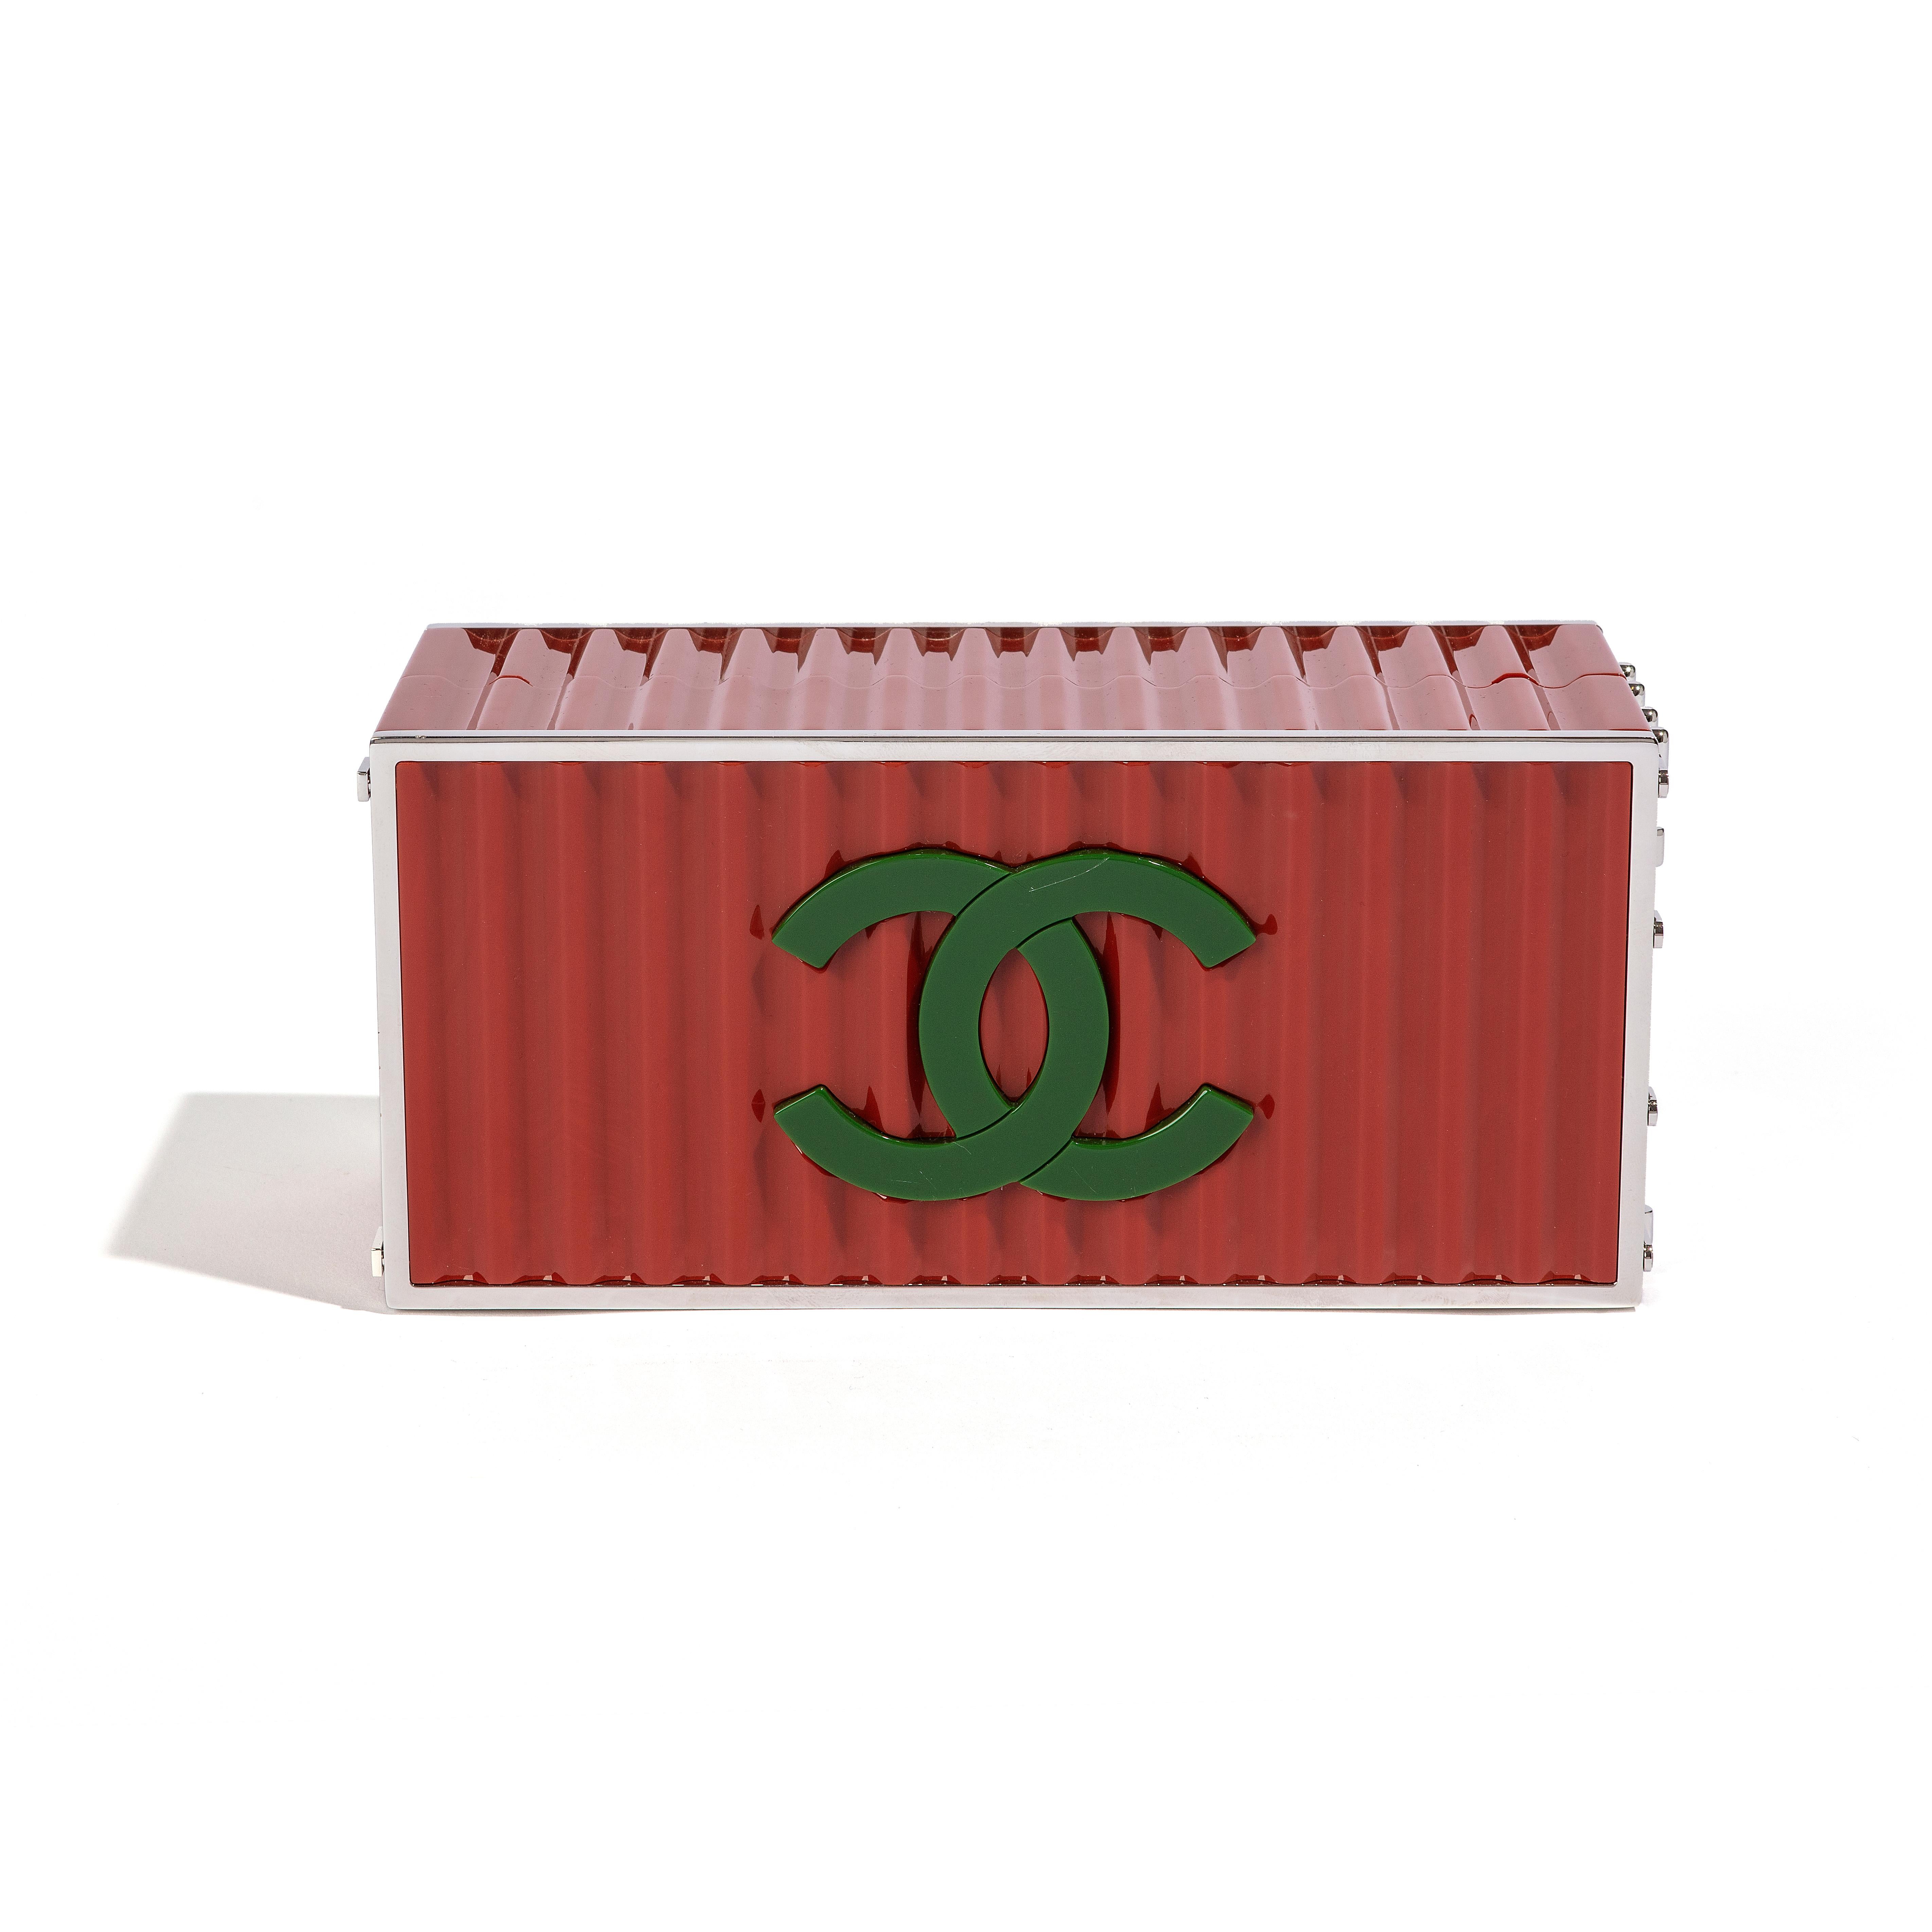 This exquisite item is a must-have for any Chanel enthusiast's collection. It is a Limited Edition Metiers D’Art 2017 Runway piece with a shipping container design. The item is made of red resin and features a chain-link strap, with the Chanel logo